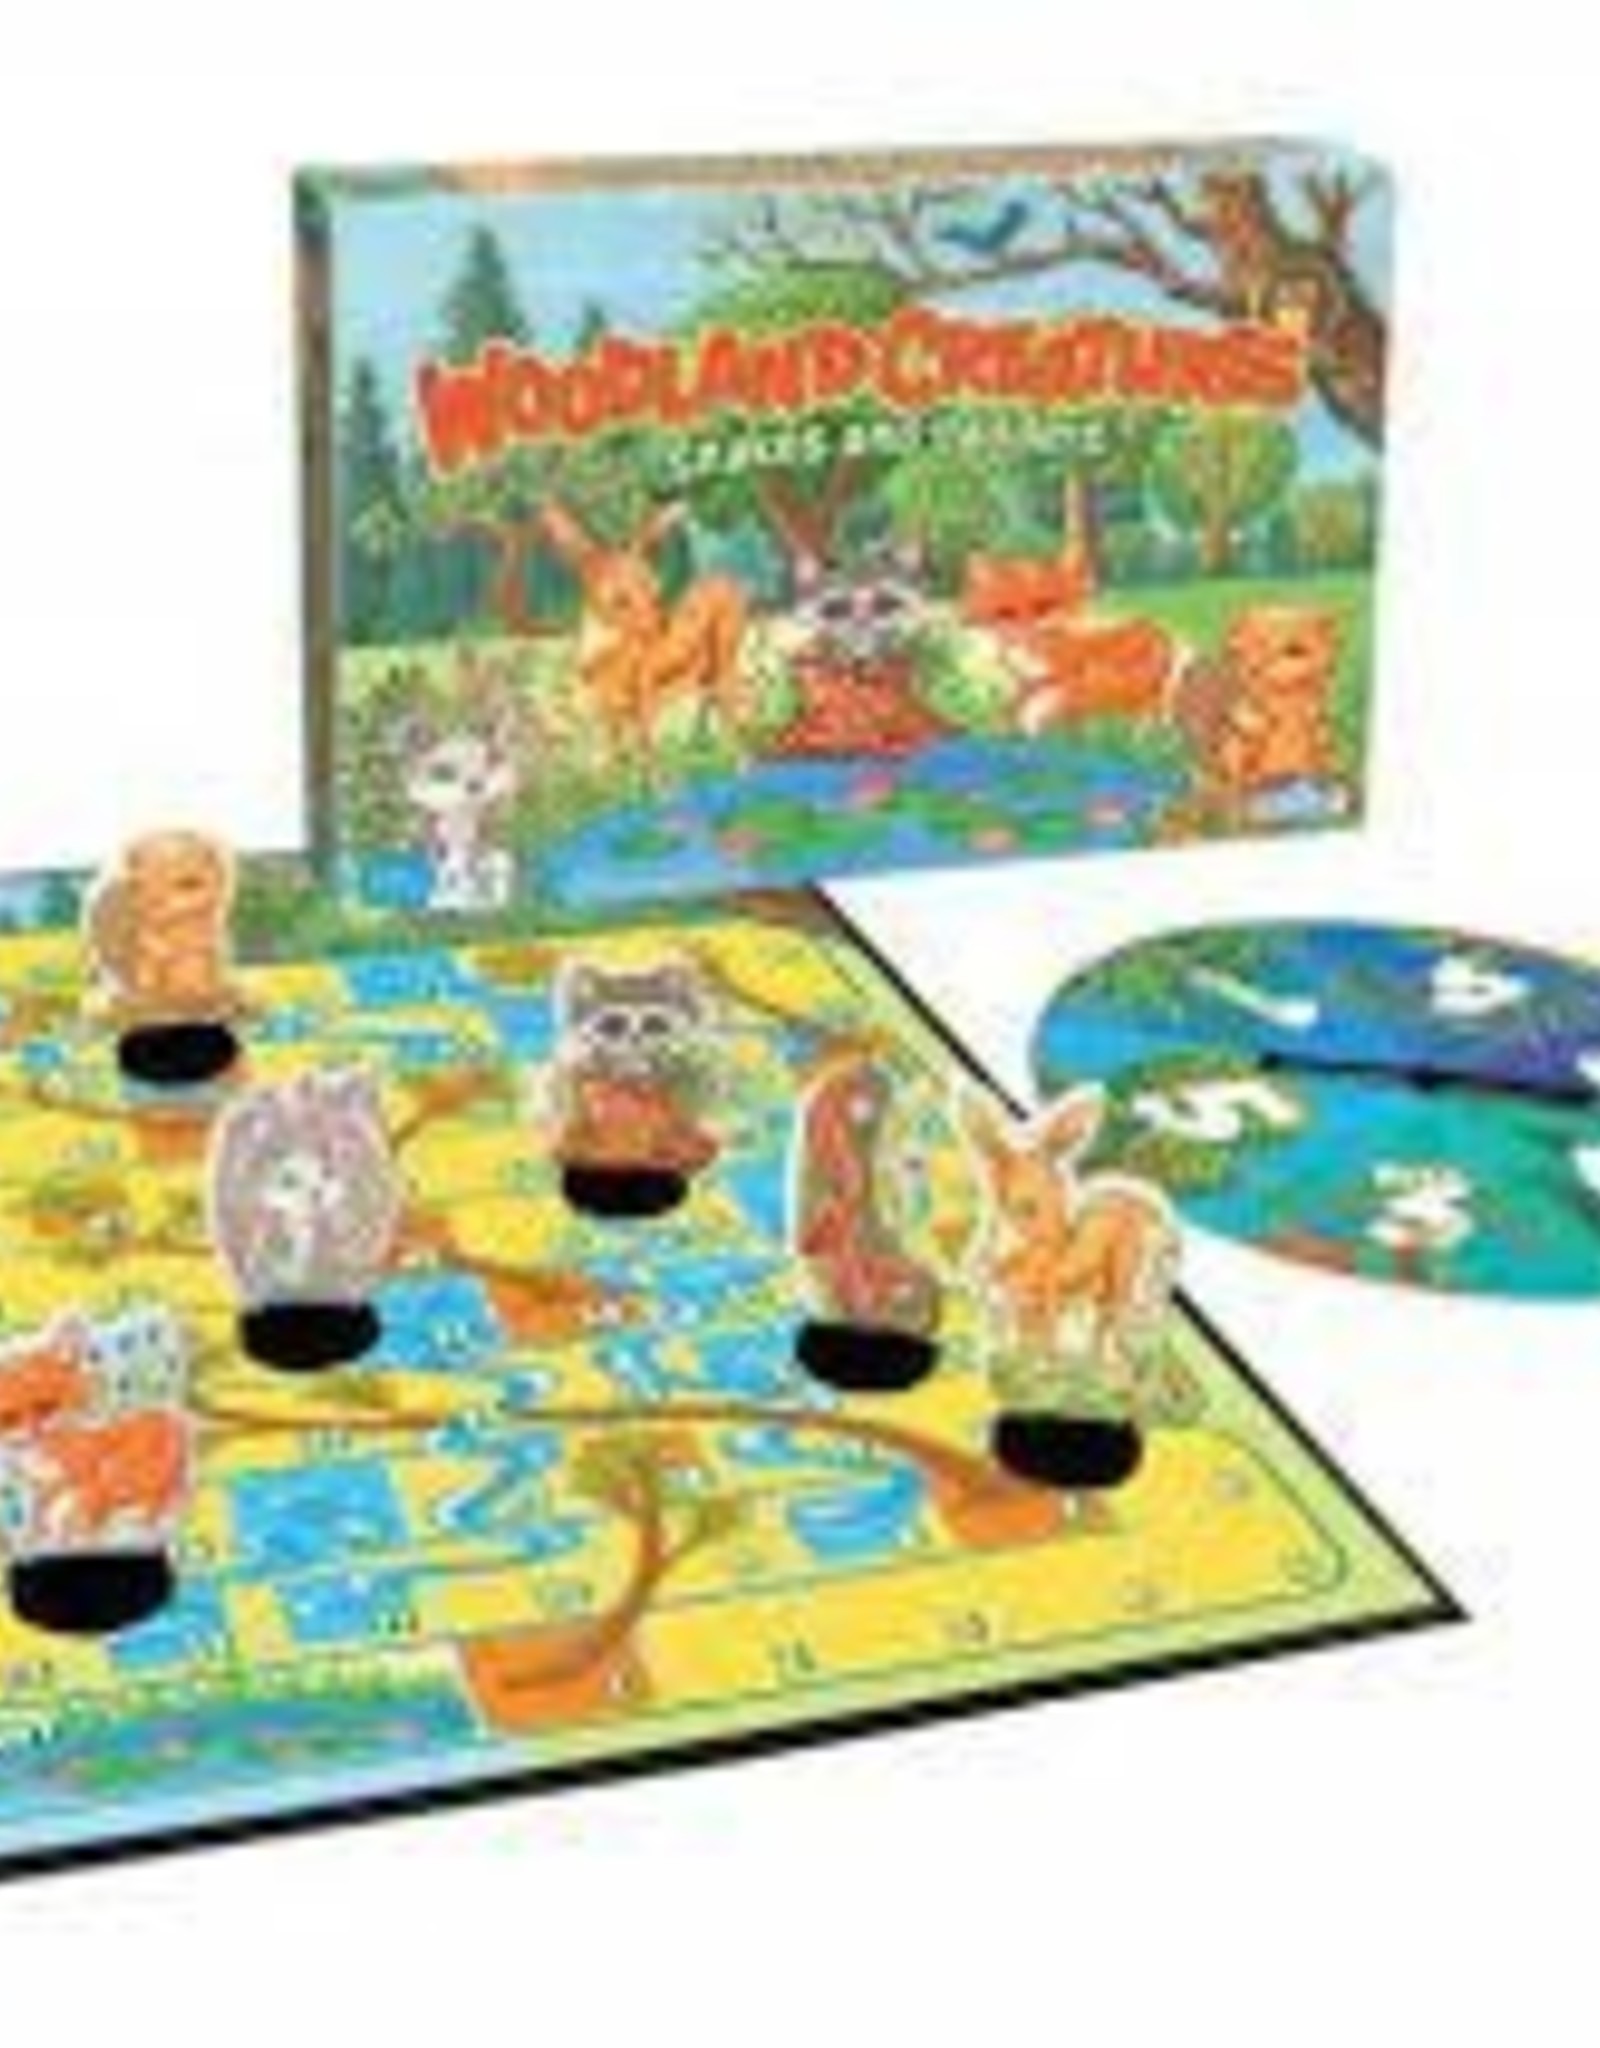 Outset media Woodland Creatures Snakes and Ladders